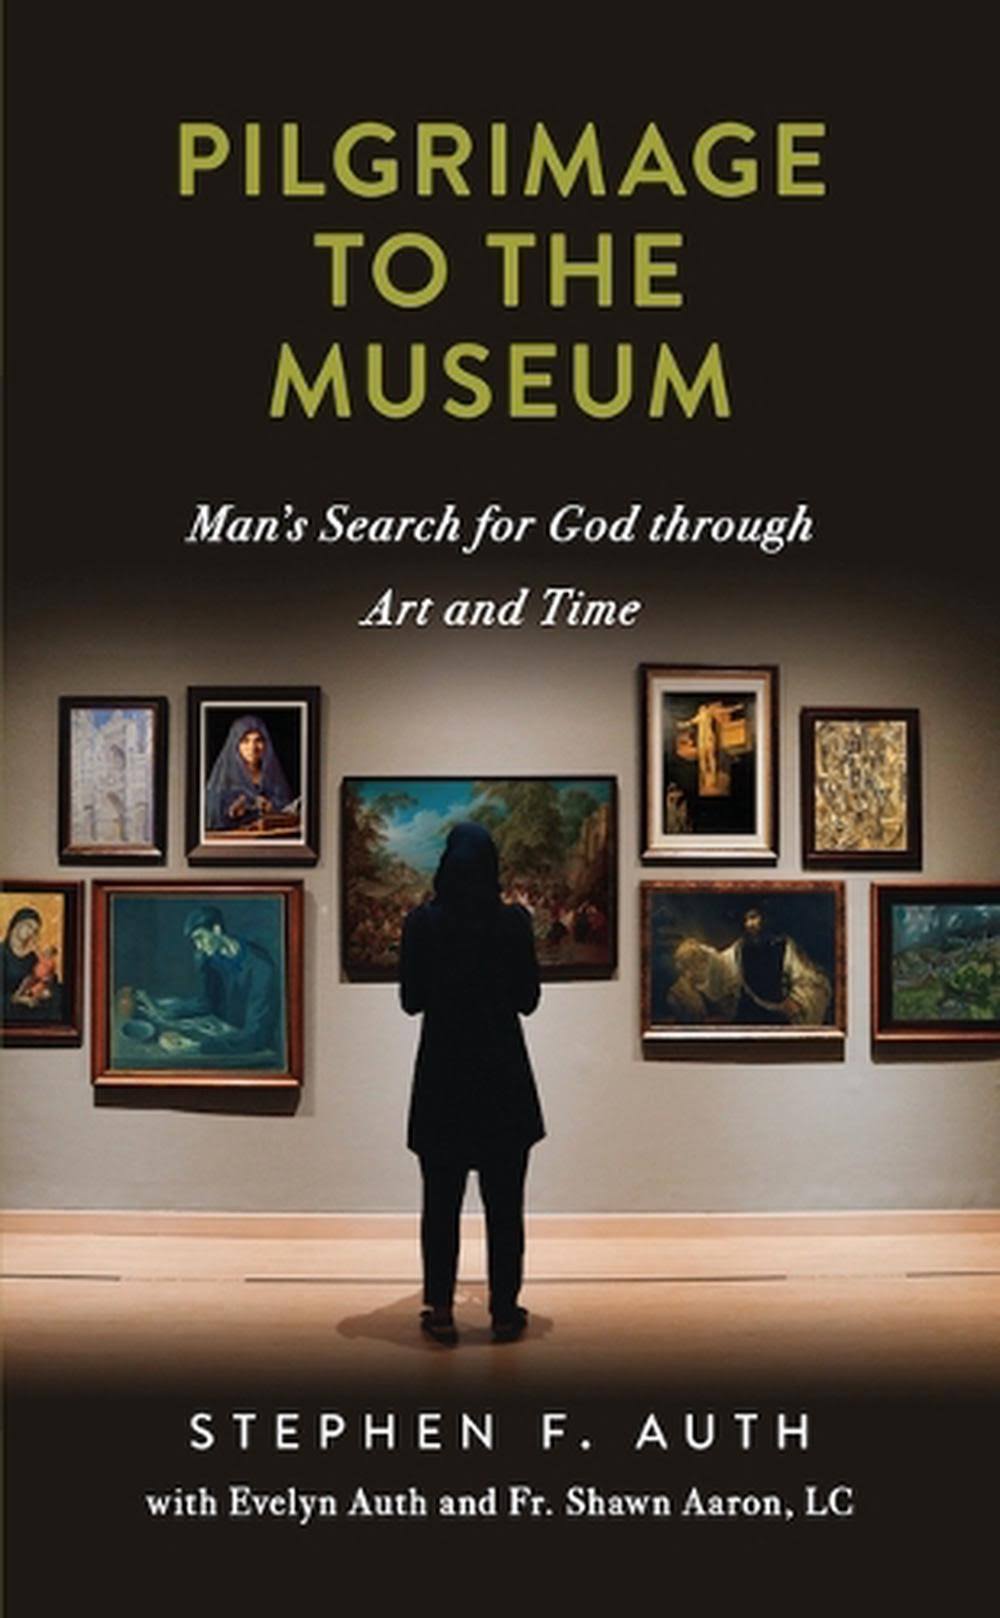 Pilgrimage to the Museum: Man's Search for God Through Art and Time [Book]